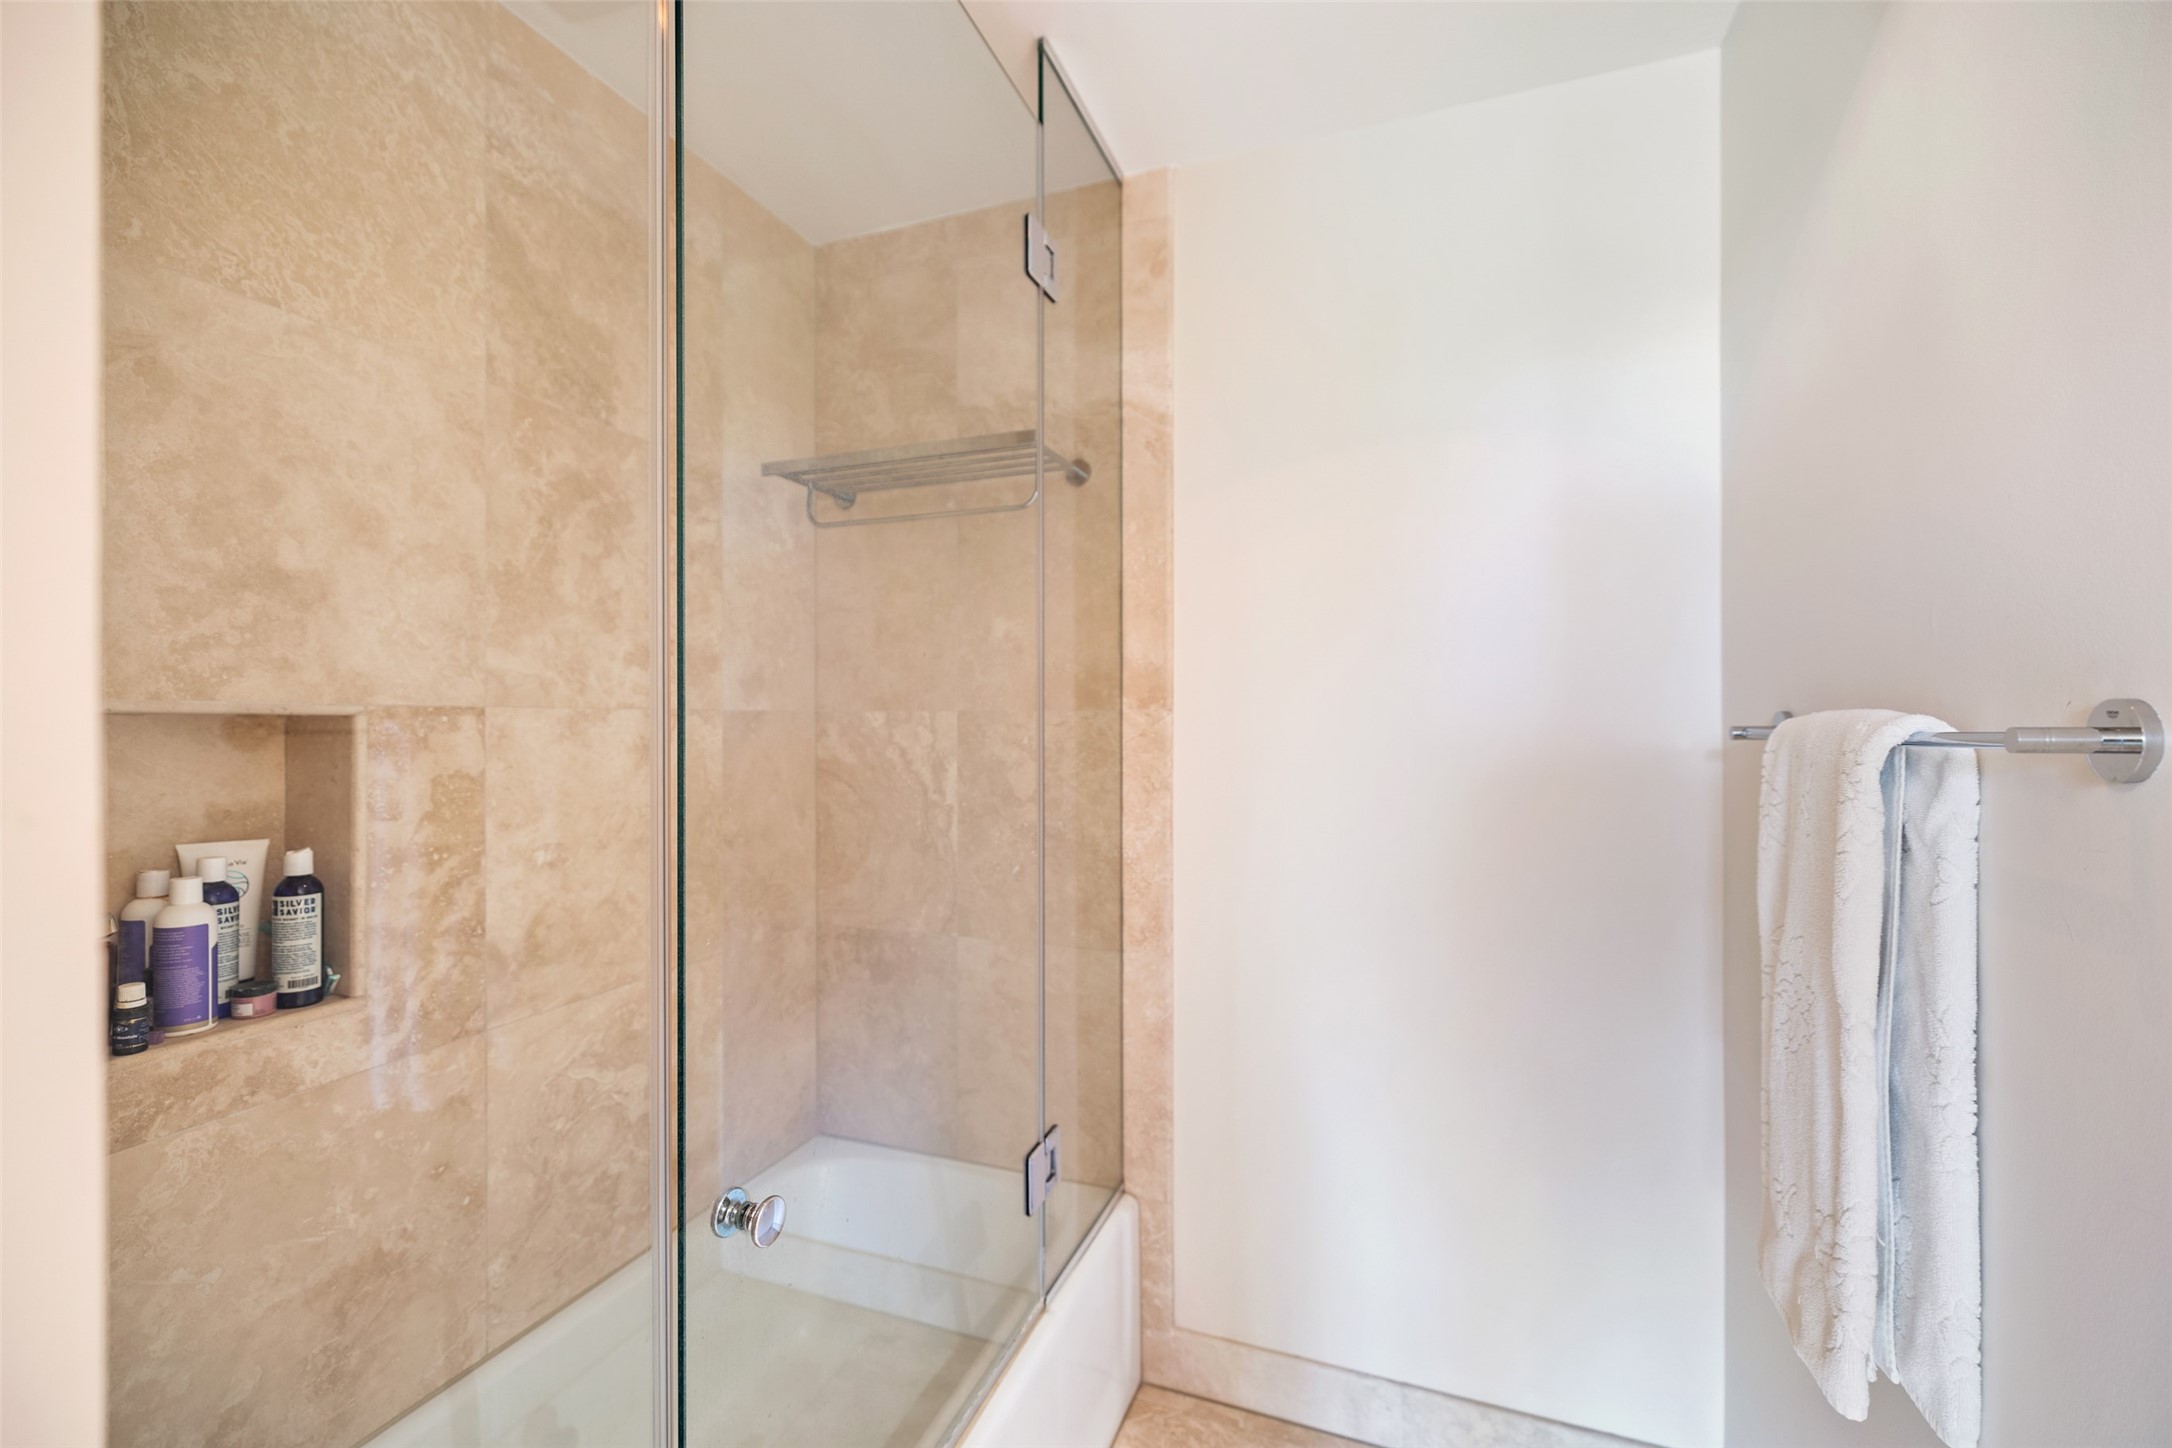 The primary bathroom also has a tub and shower with frameless glass door.